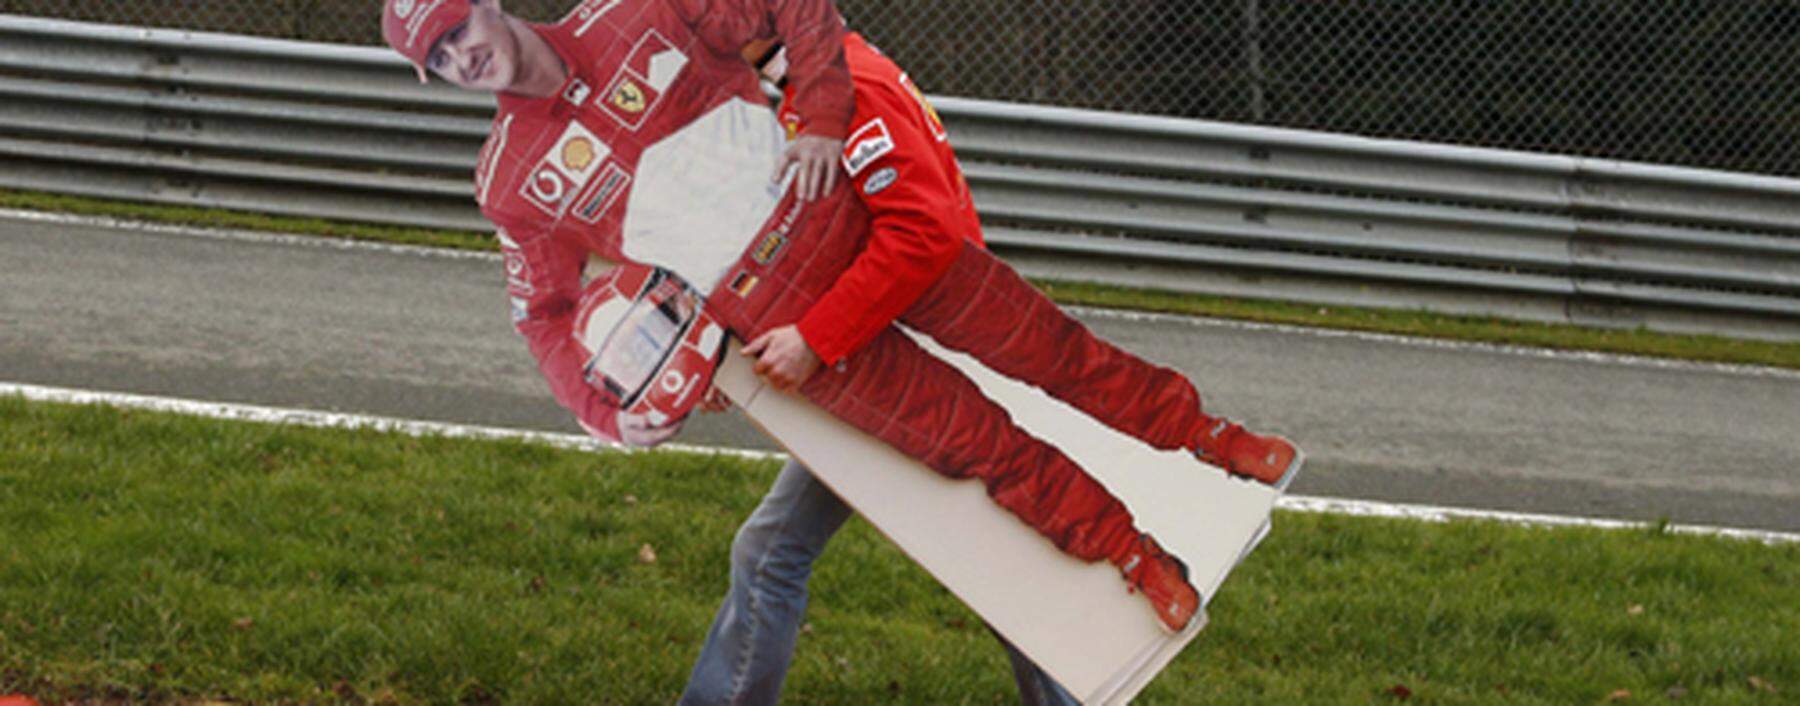 A fan holds up a cardboard cut-out of seven-times former Formula One world champion Michael Schumacher during a tribute at the Circuit of Spa-Francorchamps